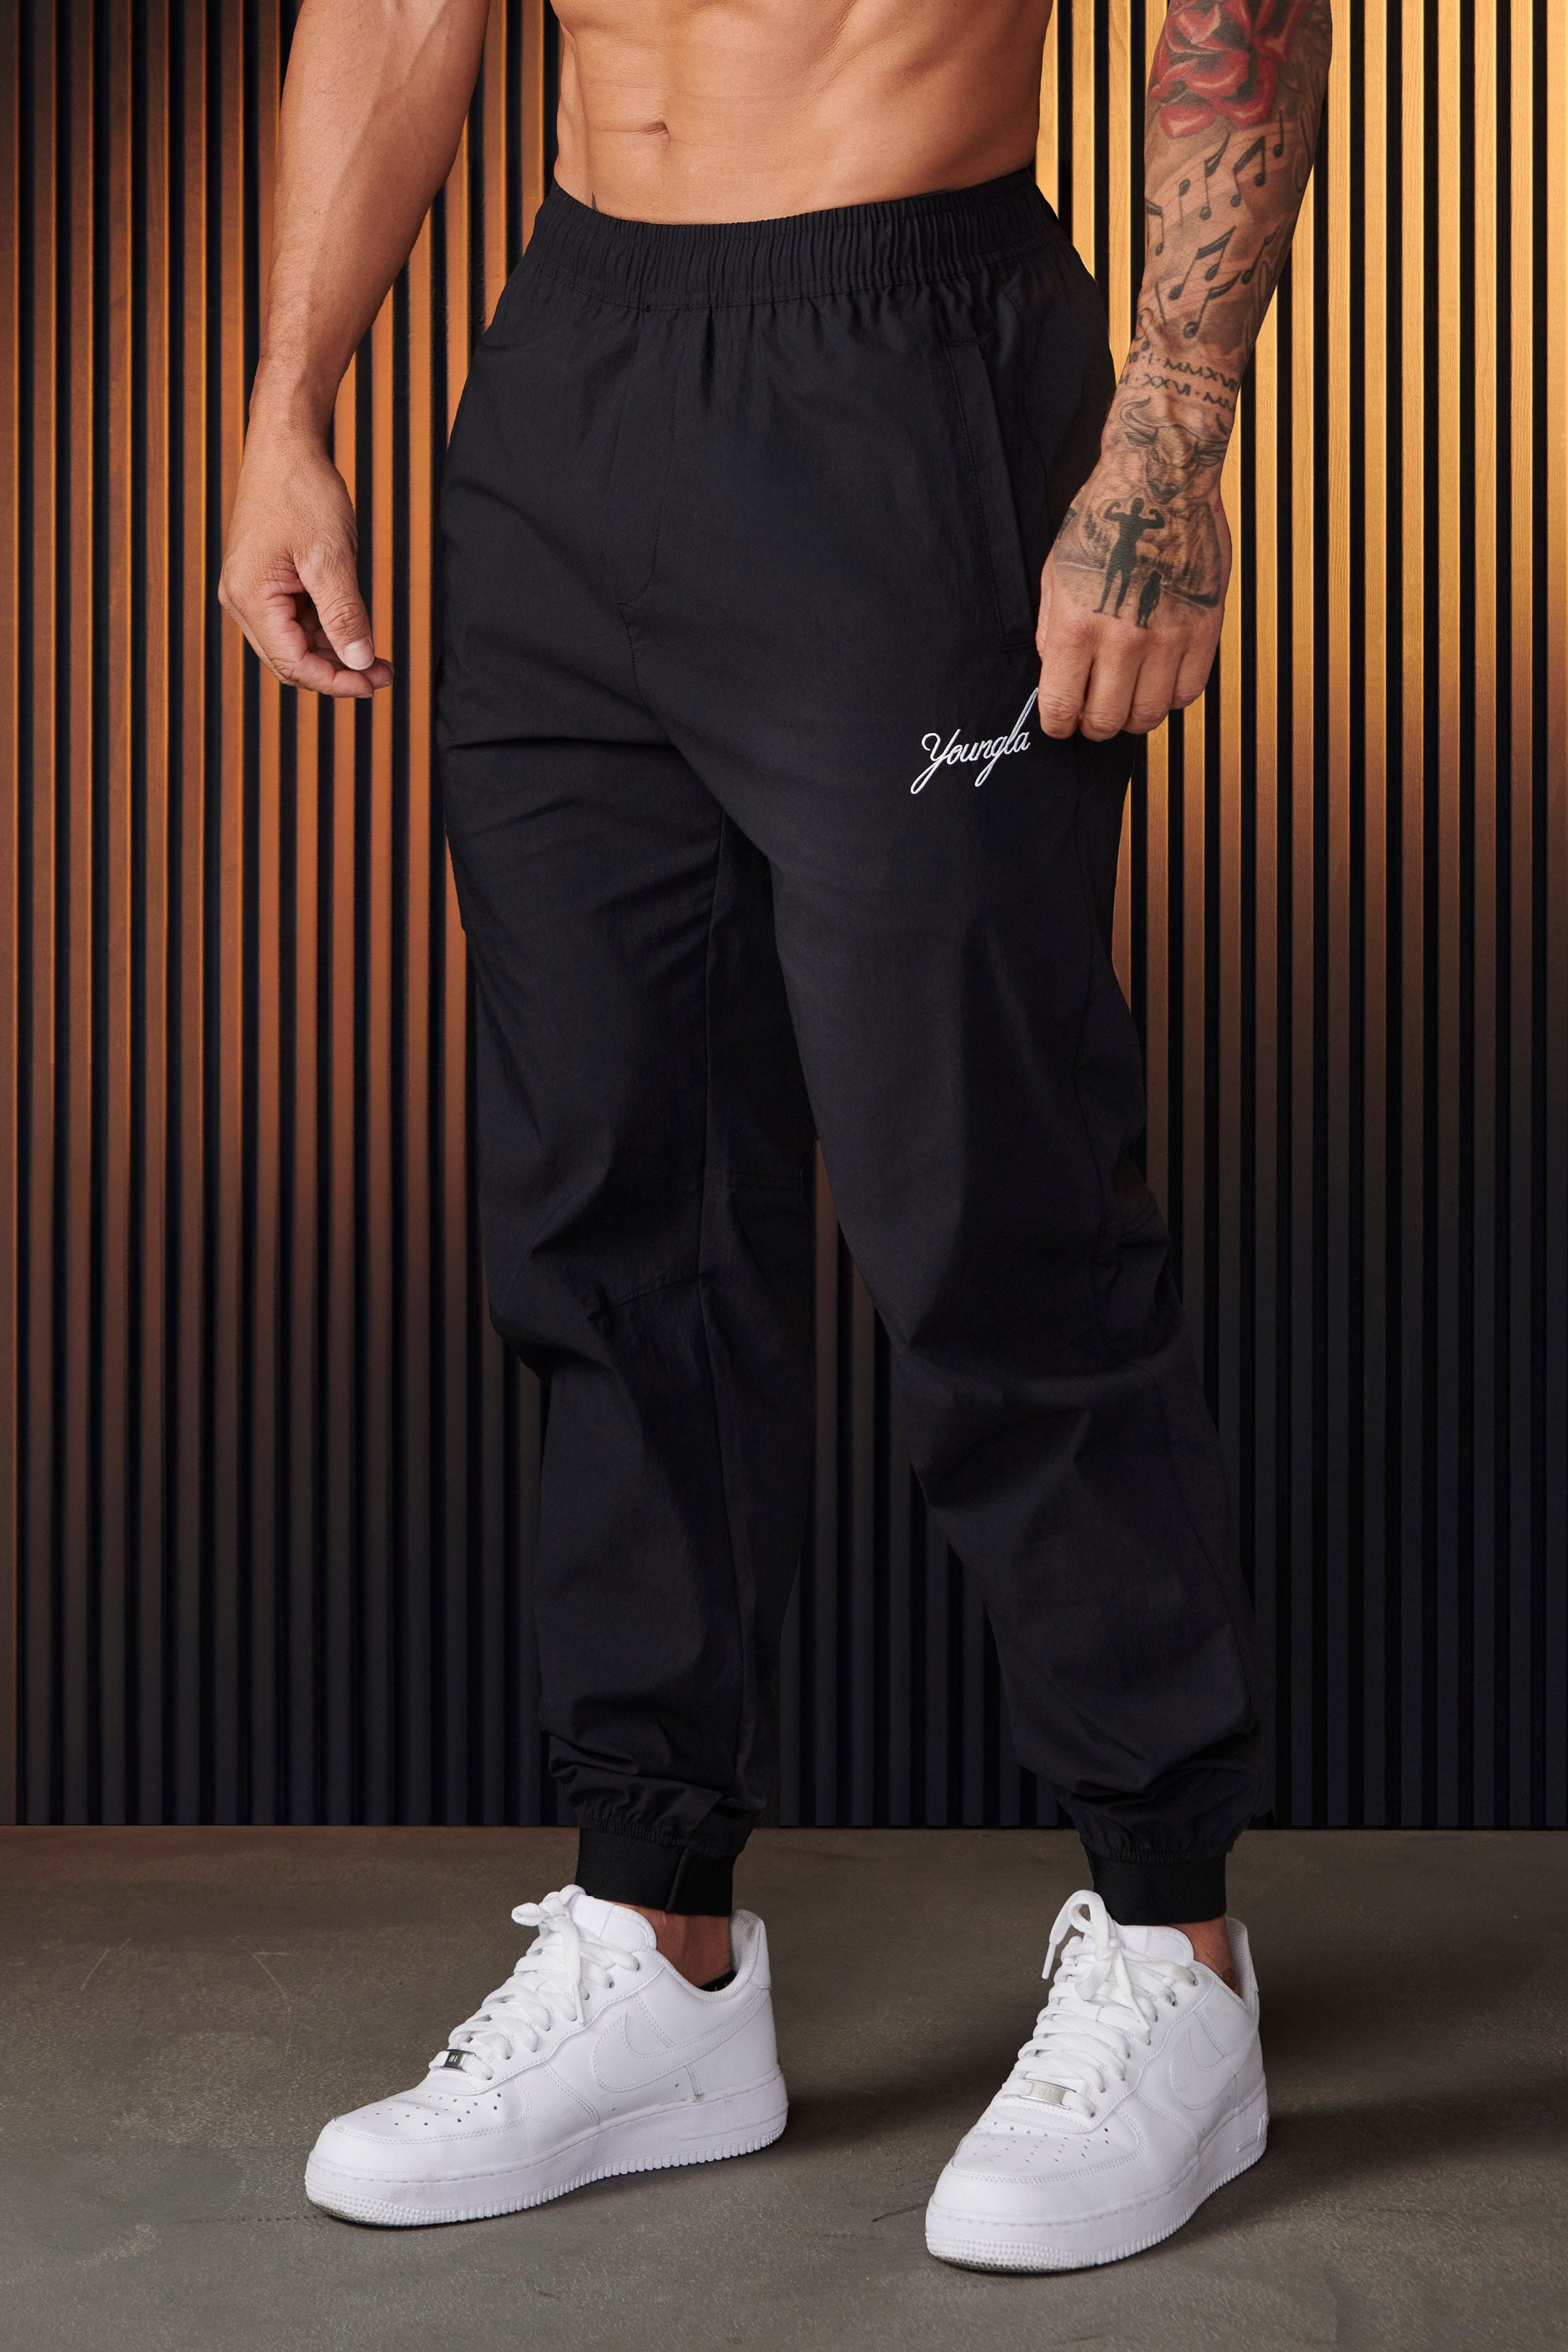 YoungLA, Flagship Track Pants are restocking next week ‼️ Be ready on  Tuesday February 13th at 12pm PST